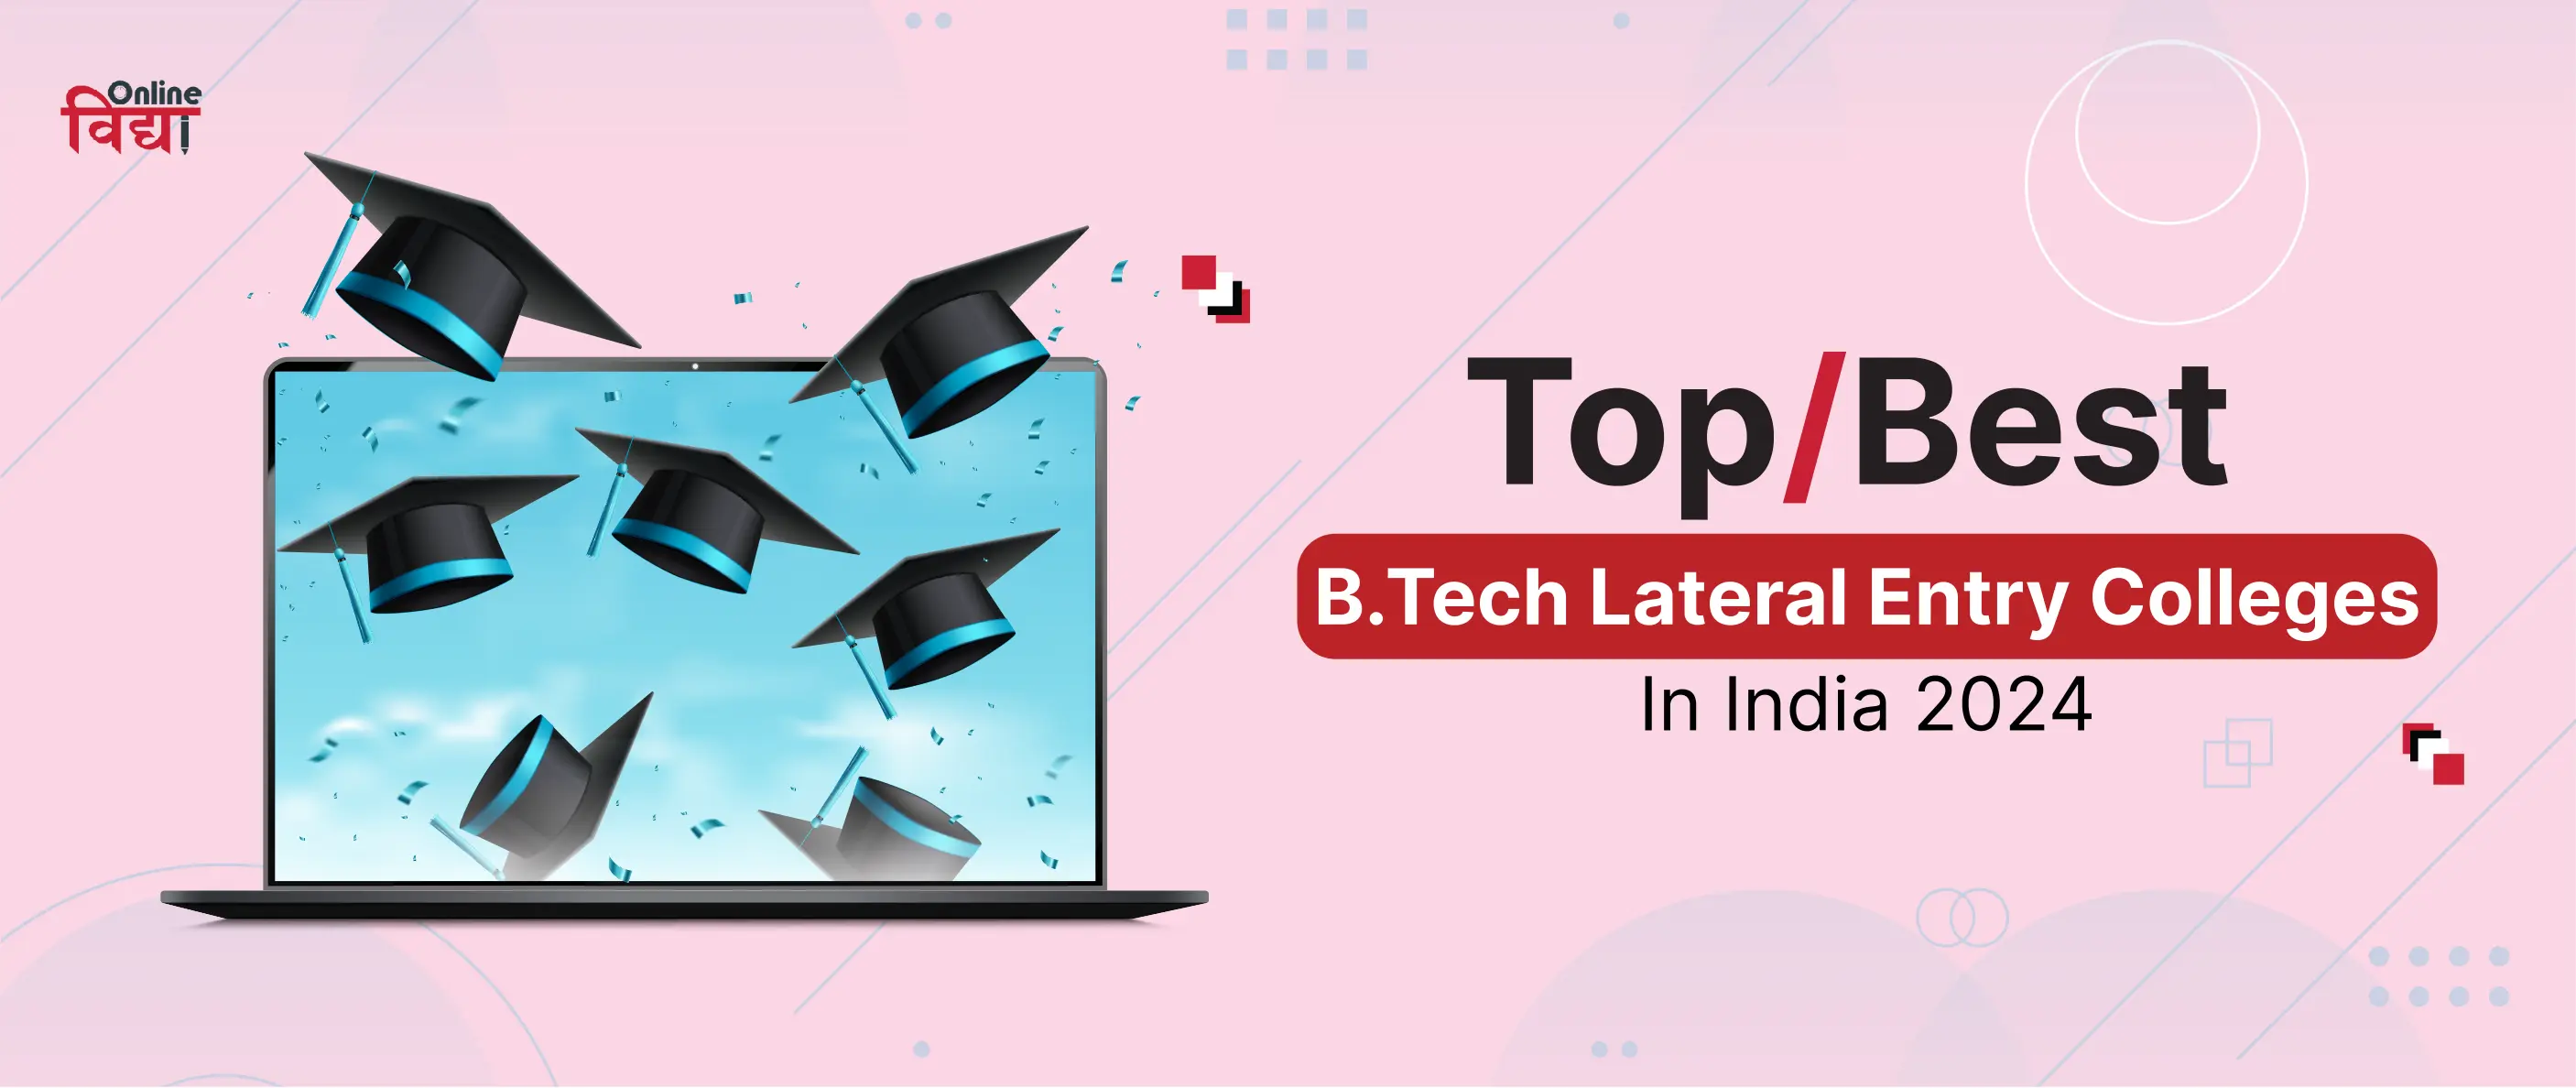 Top/Best B.Tech Lateral Entry Colleges In India 2024